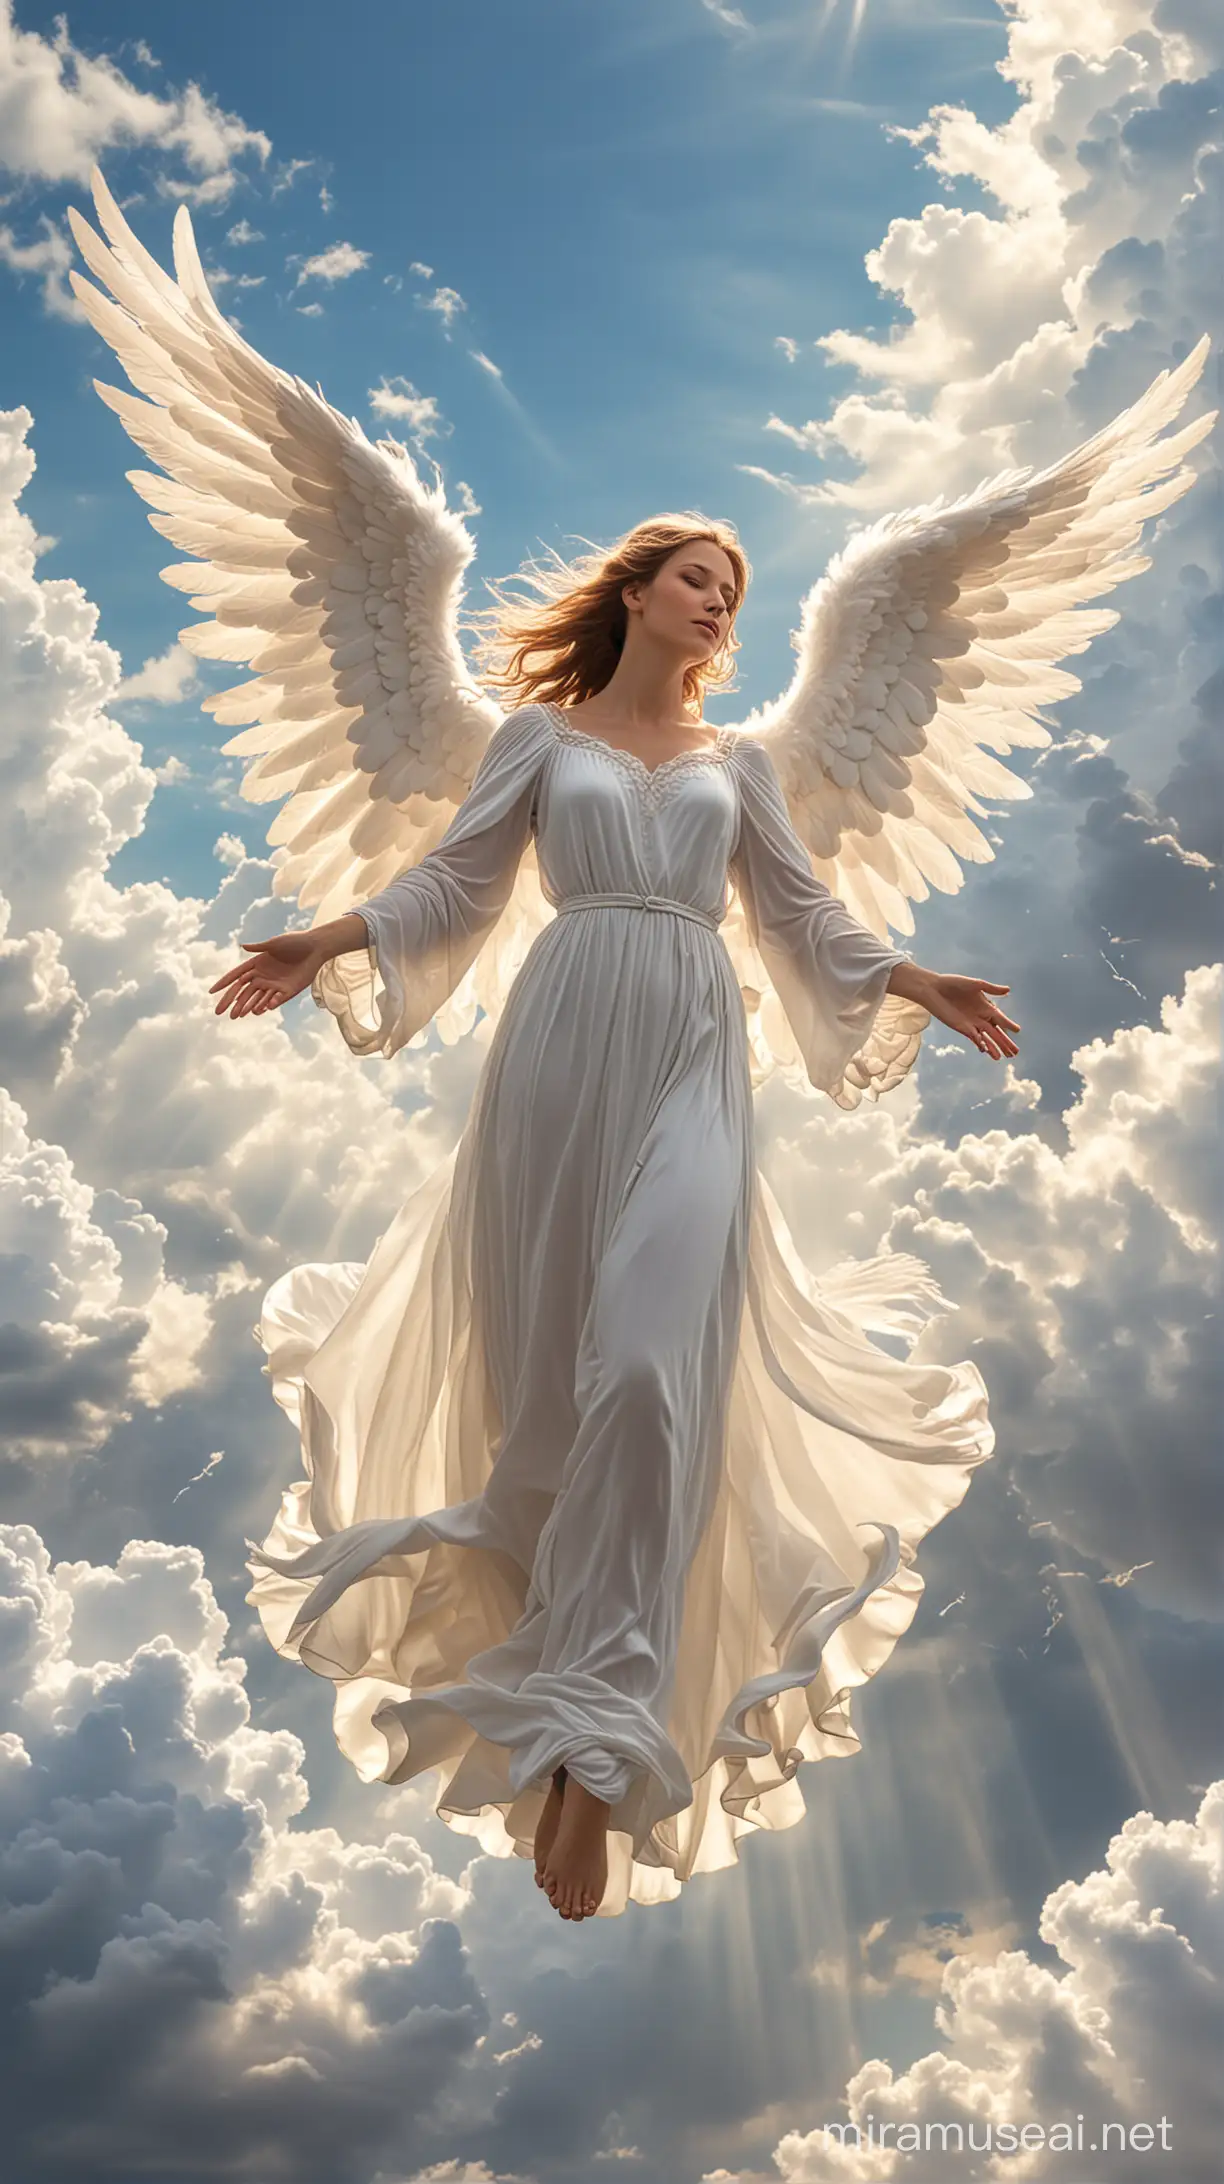 The angel of love is flying among the white clouds, with her wings open to receive the sunlight.